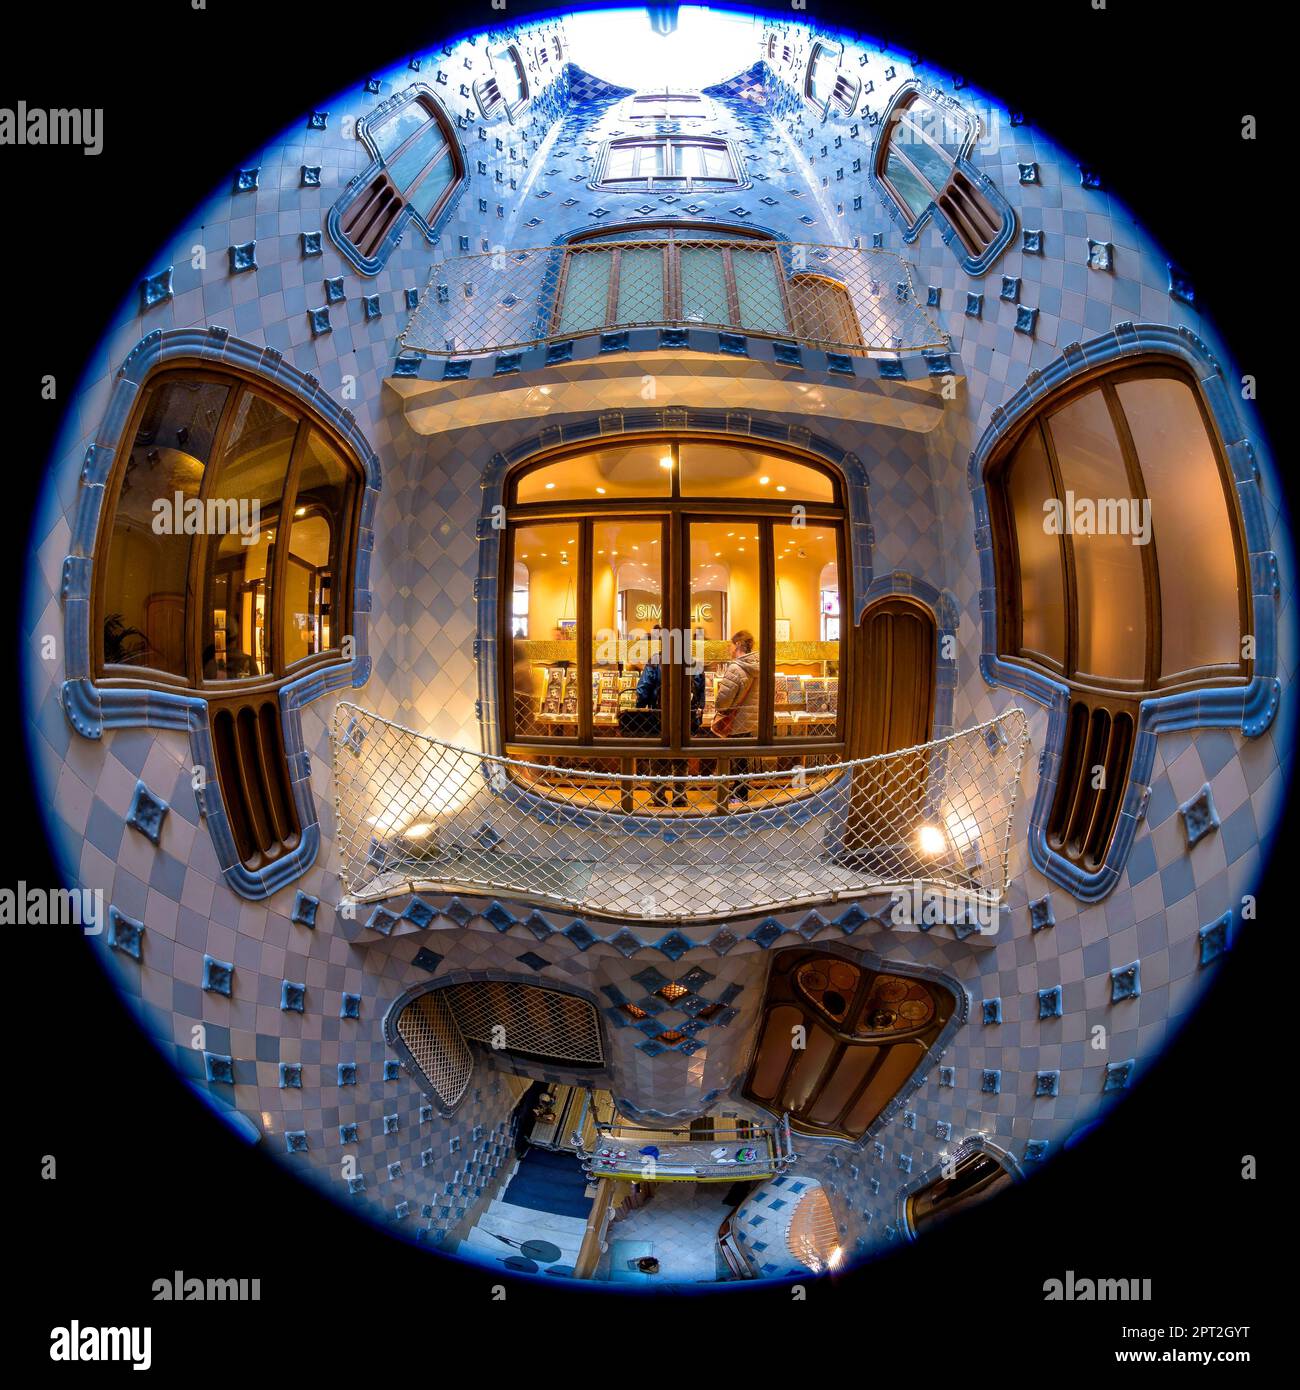 Fisheye view of the interior courtyard of Casa Batlló decorated with a gradient mosaic from blue to white designed by Gaudí. Barcelona Catalonia Spain Stock Photo